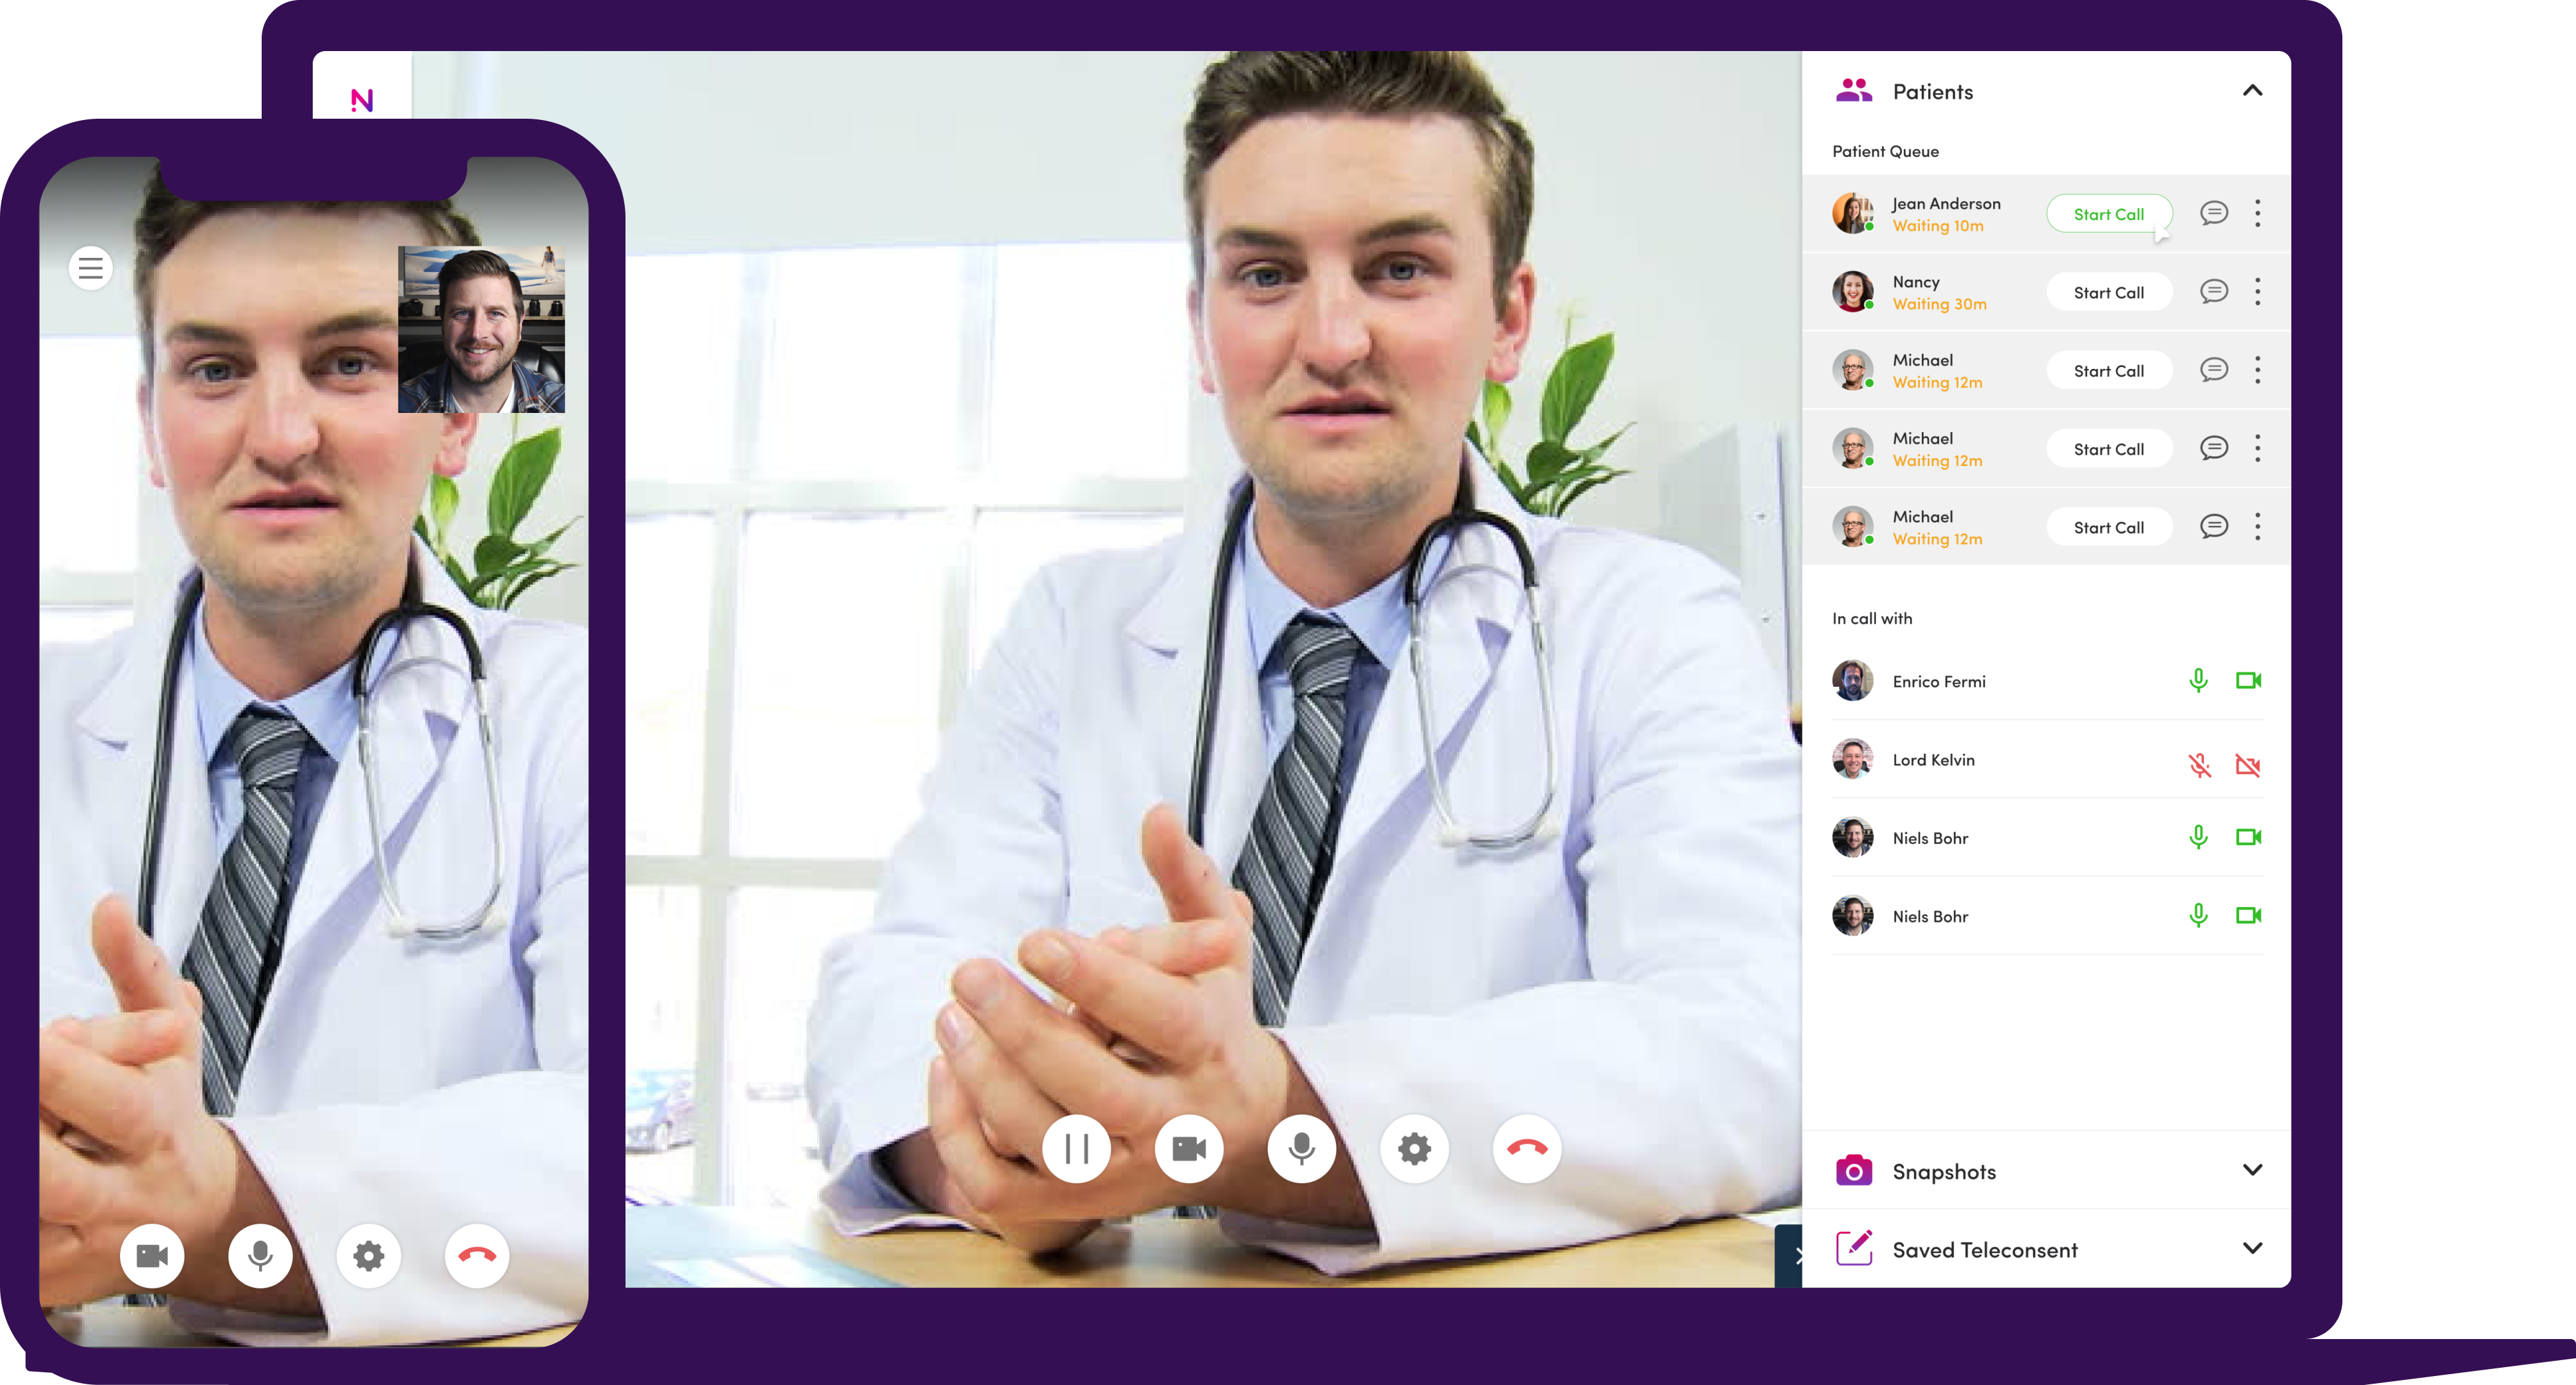 Patient queue user interface with a male doctor’s video stream on a laptop and smartphone